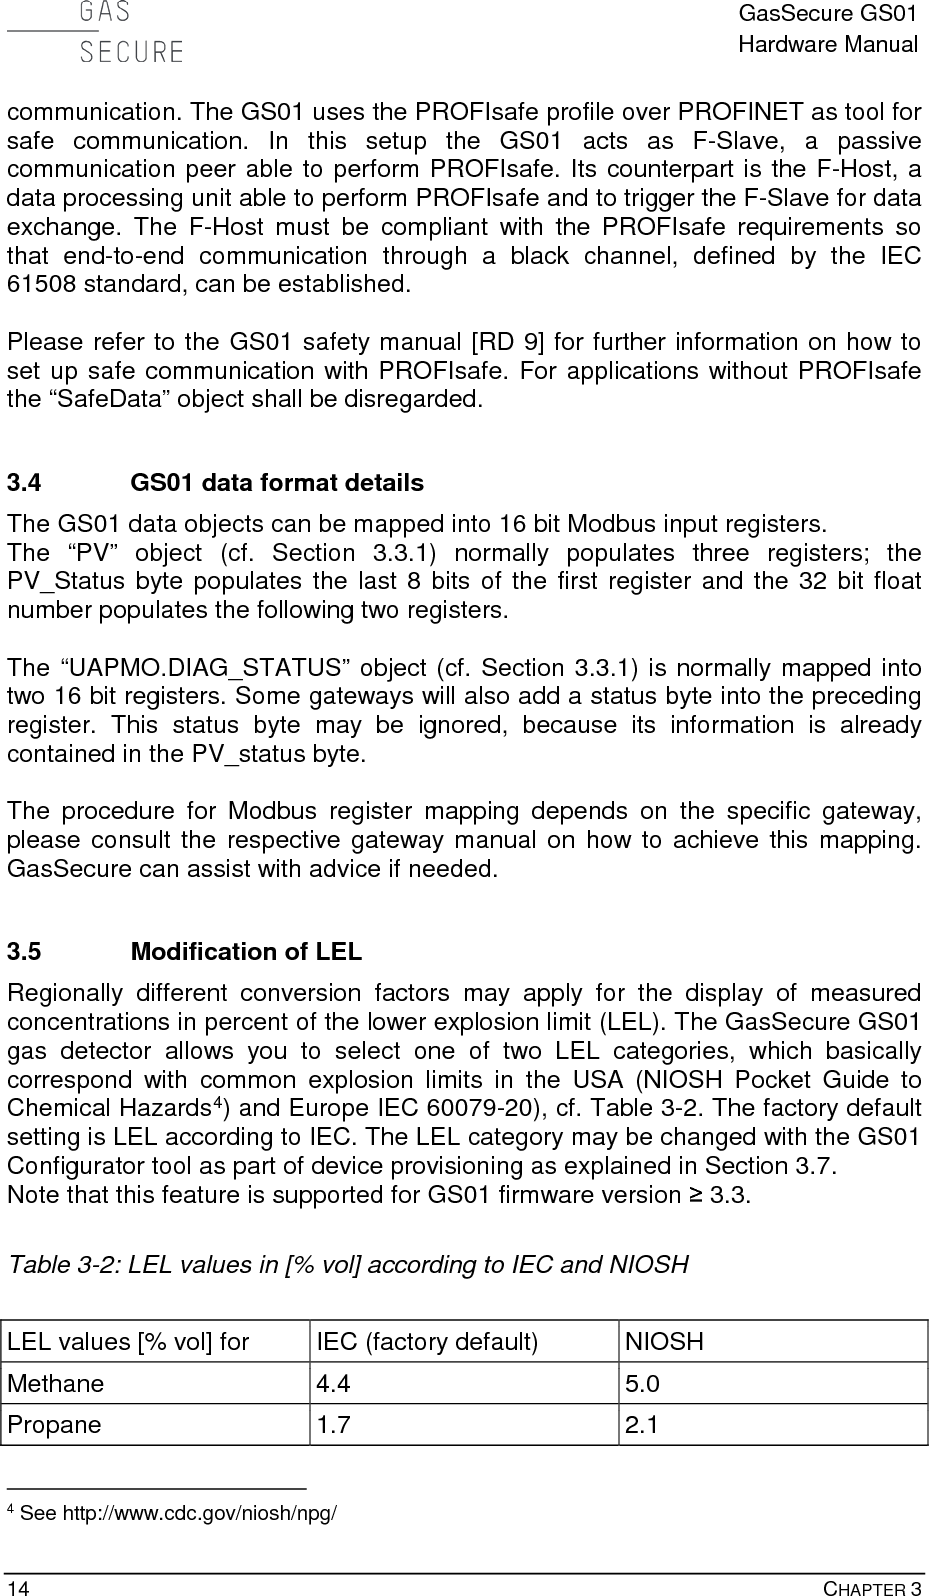  GasSecure GS01 Hardware Manual  14    CHAPTER 3 communication. The GS01 uses the PROFIsafe profile over PROFINET as tool for safe communication. In this setup the GS01 acts as F-Slave, a passive communication peer able to perform PROFIsafe. Its counterpart is the F-Host, a data processing unit able to perform PROFIsafe and to trigger the F-Slave for data exchange. The F-Host must be compliant with the PROFIsafe requirements so that end-to-end communication through a black channel, defined by the IEC 61508 standard, can be established.  Please refer to the GS01 safety manual [RD 9] for further information on how to set up safe communication with PROFIsafe. For applications without PROFIsafe the “SafeData” object shall be disregarded.  3.4 GS01 data format details The GS01 data objects can be mapped into 16 bit Modbus input registers. The  “PV”  object  (cf. Section 3.3.1)  normally populates three registers; the PV_Status byte populates the last 8 bits of the first register and the 32 bit float number populates the following two registers.  The “UAPMO.DIAG_STATUS” object (cf. Section 3.3.1) is normally mapped into two 16 bit registers. Some gateways will also add a status byte into the preceding register. This status byte  may be ignored, because its information is already contained in the PV_status byte.   The  procedure for Modbus register mapping depends on the  specific  gateway, please consult the respective gateway manual on how to achieve this mapping. GasSecure can assist with advice if needed.  3.5 Modification of LEL Regionally different conversion factors may apply for the display of measured concentrations in percent of the lower explosion limit (LEL). The GasSecure GS01 gas detector allows you to select one of two LEL categories, which basically correspond with common explosion limits in the USA (NIOSH Pocket Guide to Chemical Hazards4) and Europe IEC 60079-20), cf. Table 3-2. The factory default setting is LEL according to IEC. The LEL category may be changed with the GS01 Configurator tool as part of device provisioning as explained in Section 3.7. Note that this feature is supported for GS01 firmware version ≥ 3.3.  Table 3-2: LEL values in [% vol] according to IEC and NIOSH  LEL values [% vol] for IEC (factory default) NIOSH Methane 4.4 5.0 Propane 1.7 2.1                                             4 See http://www.cdc.gov/niosh/npg/ 